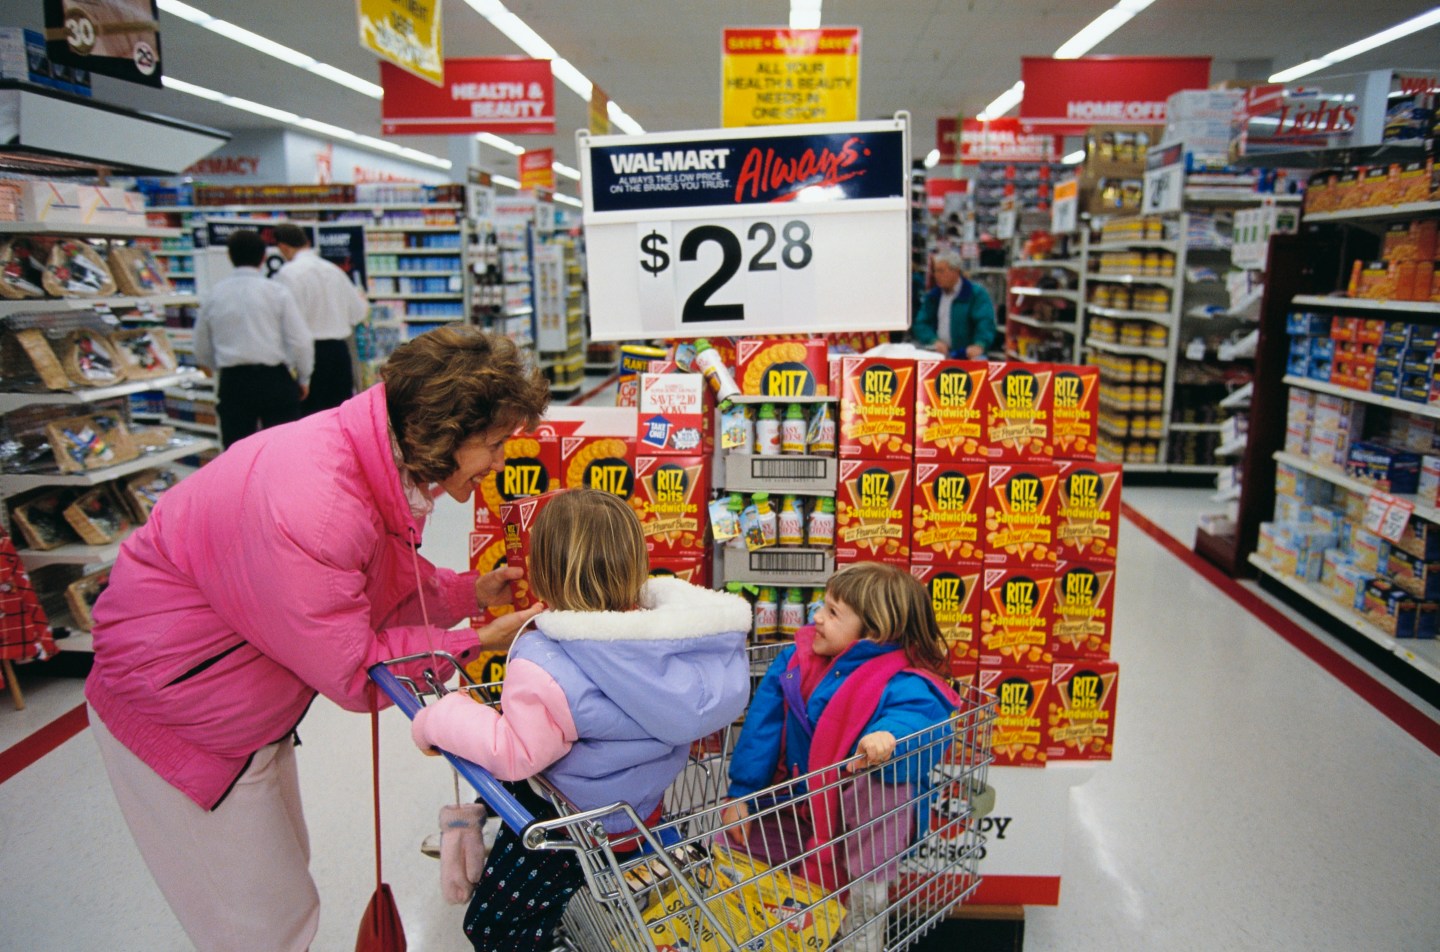 (Original Caption) Wal-Mart stores offer significant savings. (Photo by © Ralf-Finn Hestoft/CORBIS/Corbis via Getty Images)